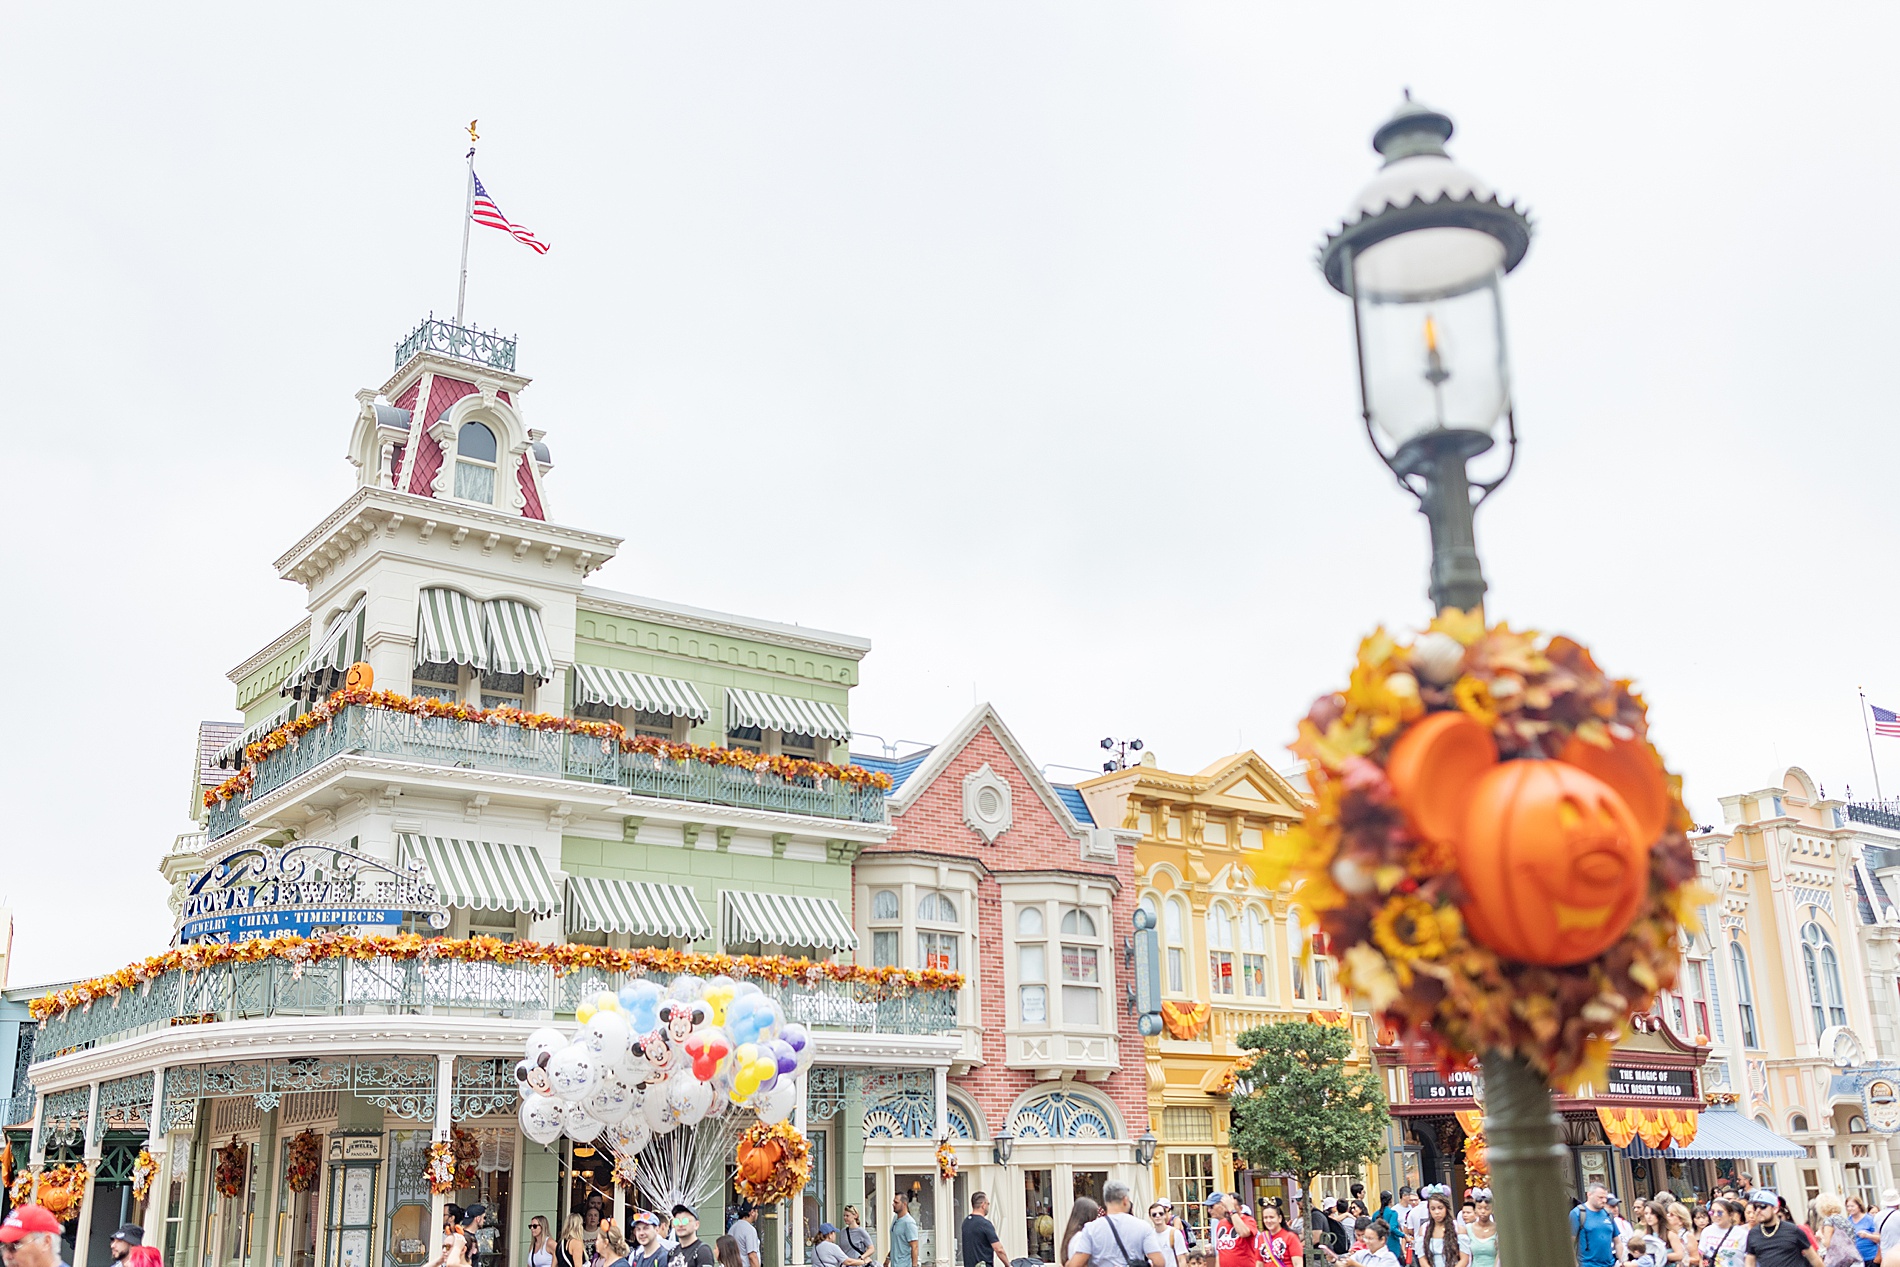 Disney World decorated for fall